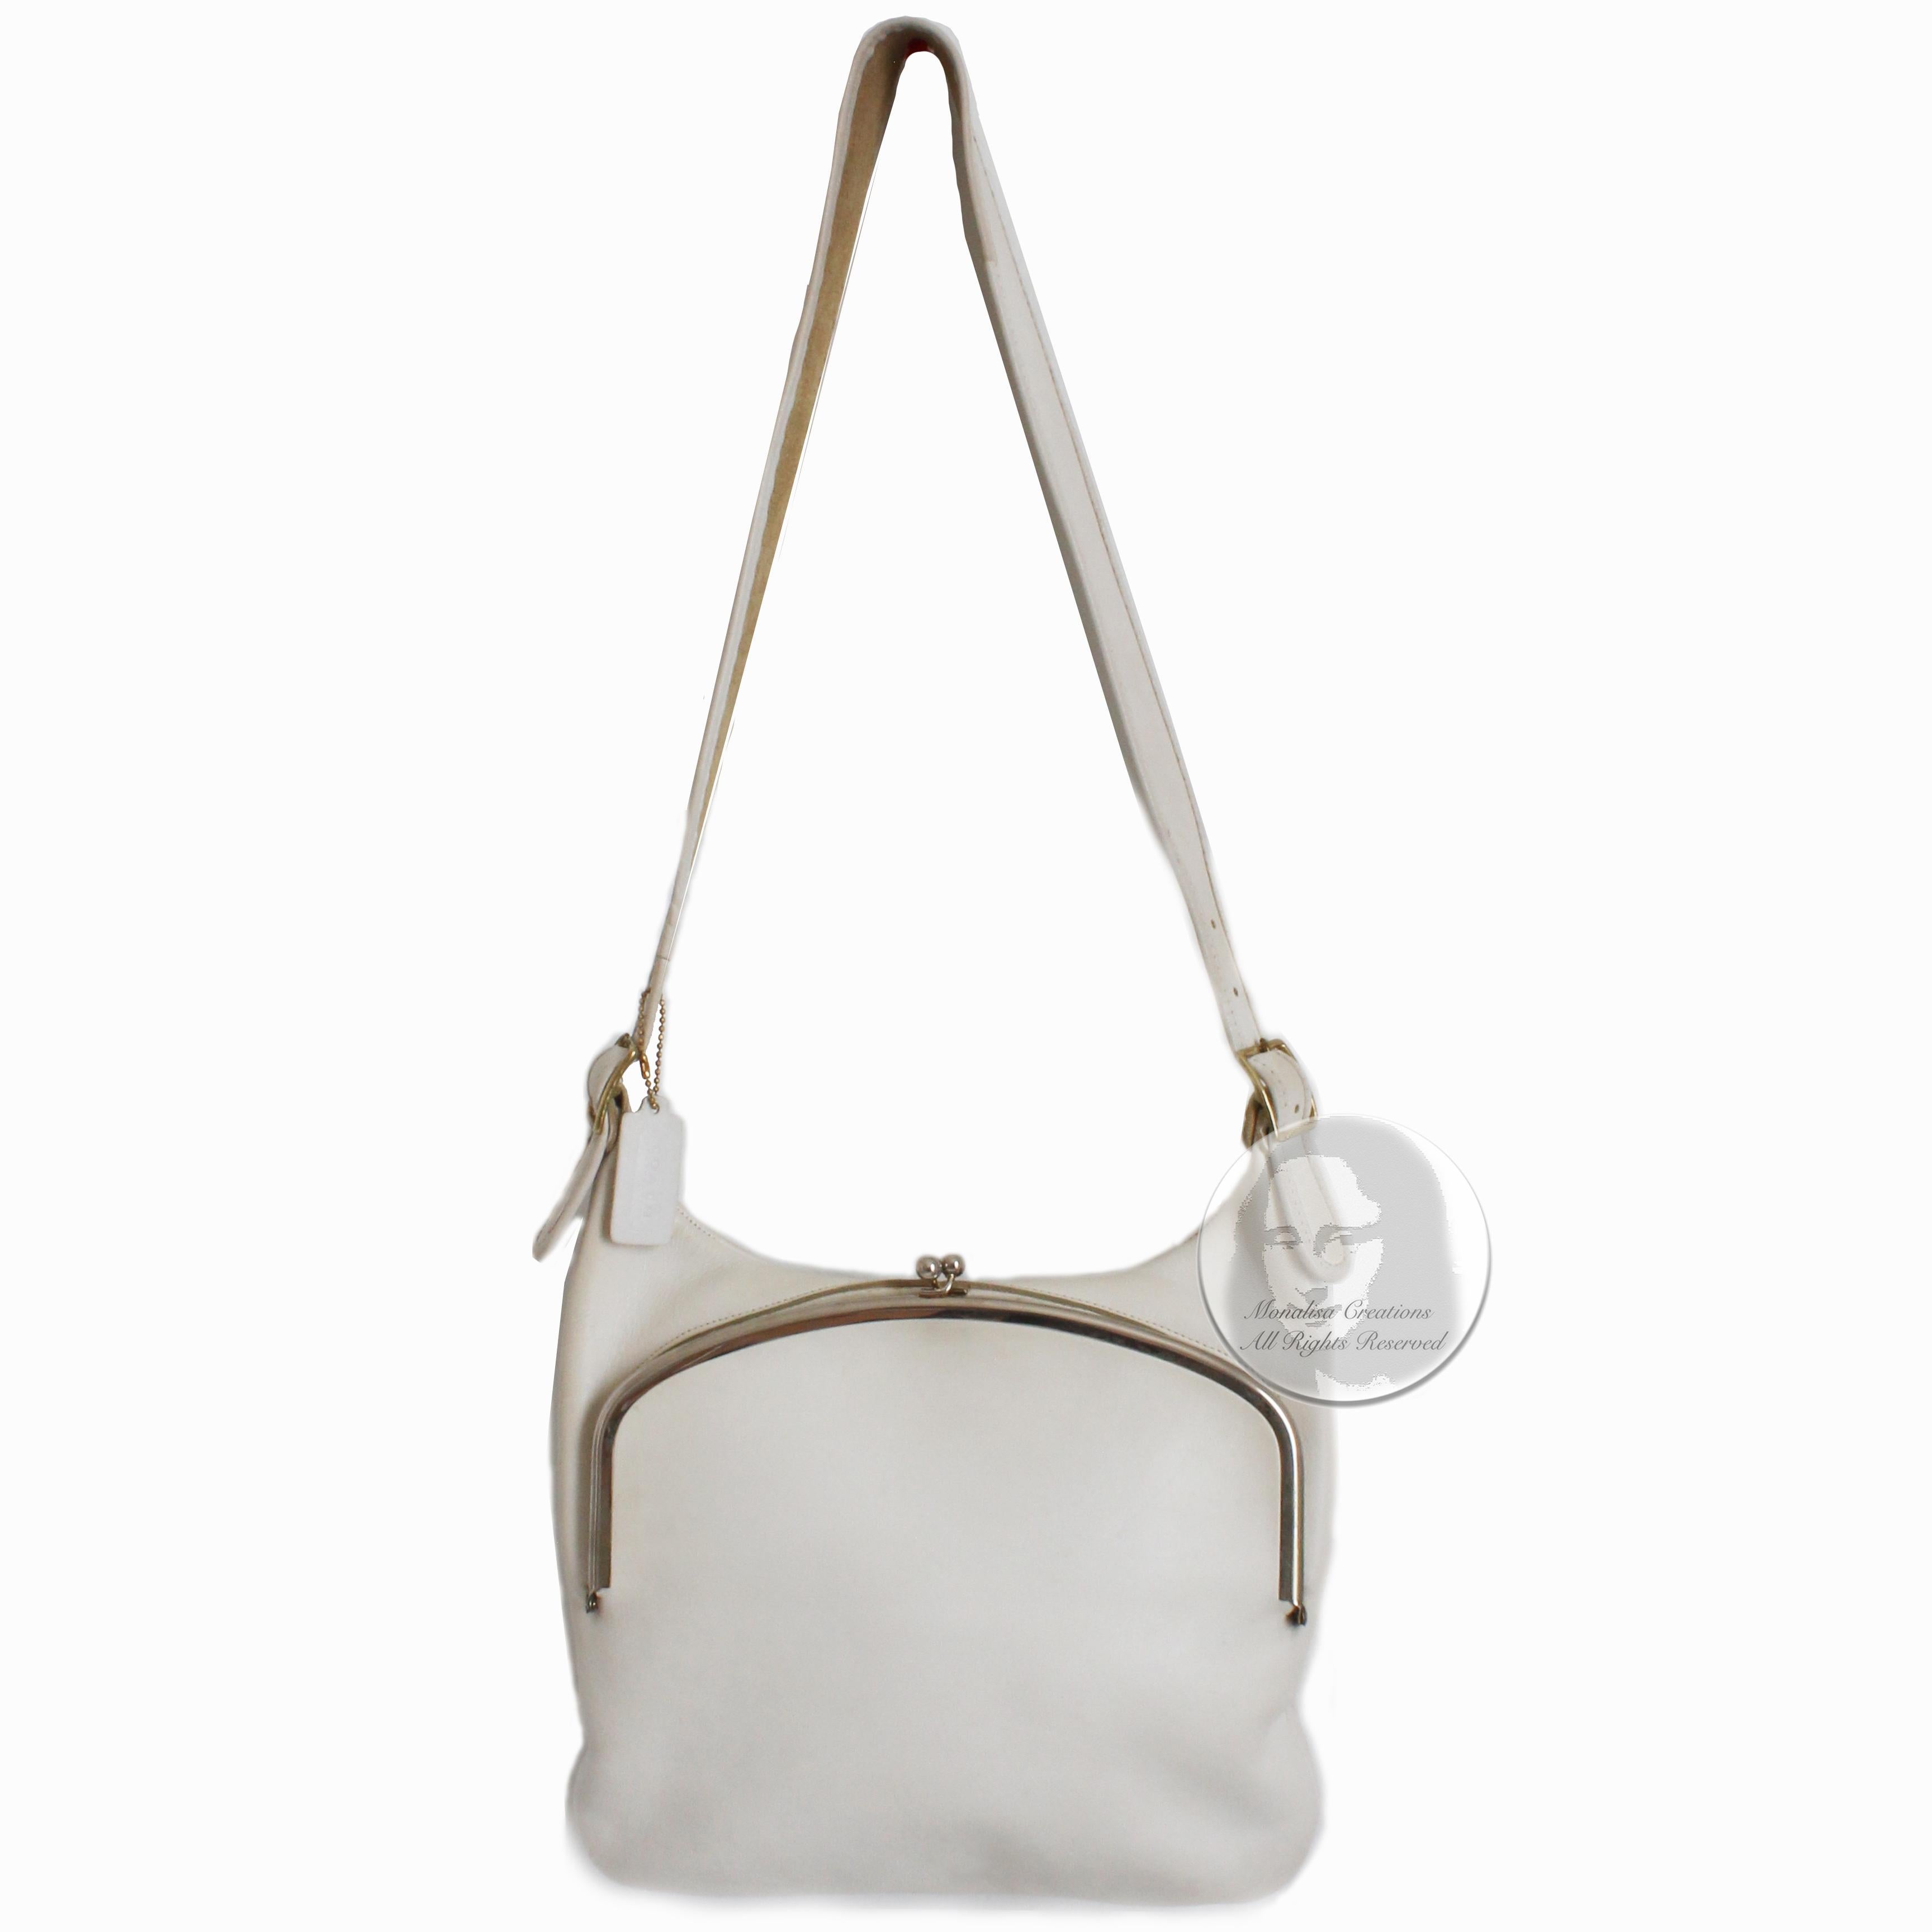 Authentic, preowned, vintage Bonnie Cashin for Coach Frame Bag aka the 'wide mouth' or 'guitar strap' bag, likely made in the 1970s. Made from white leather, this chic vintage bag features a huge kiss lock fastener and a spacious, unlined interior. 